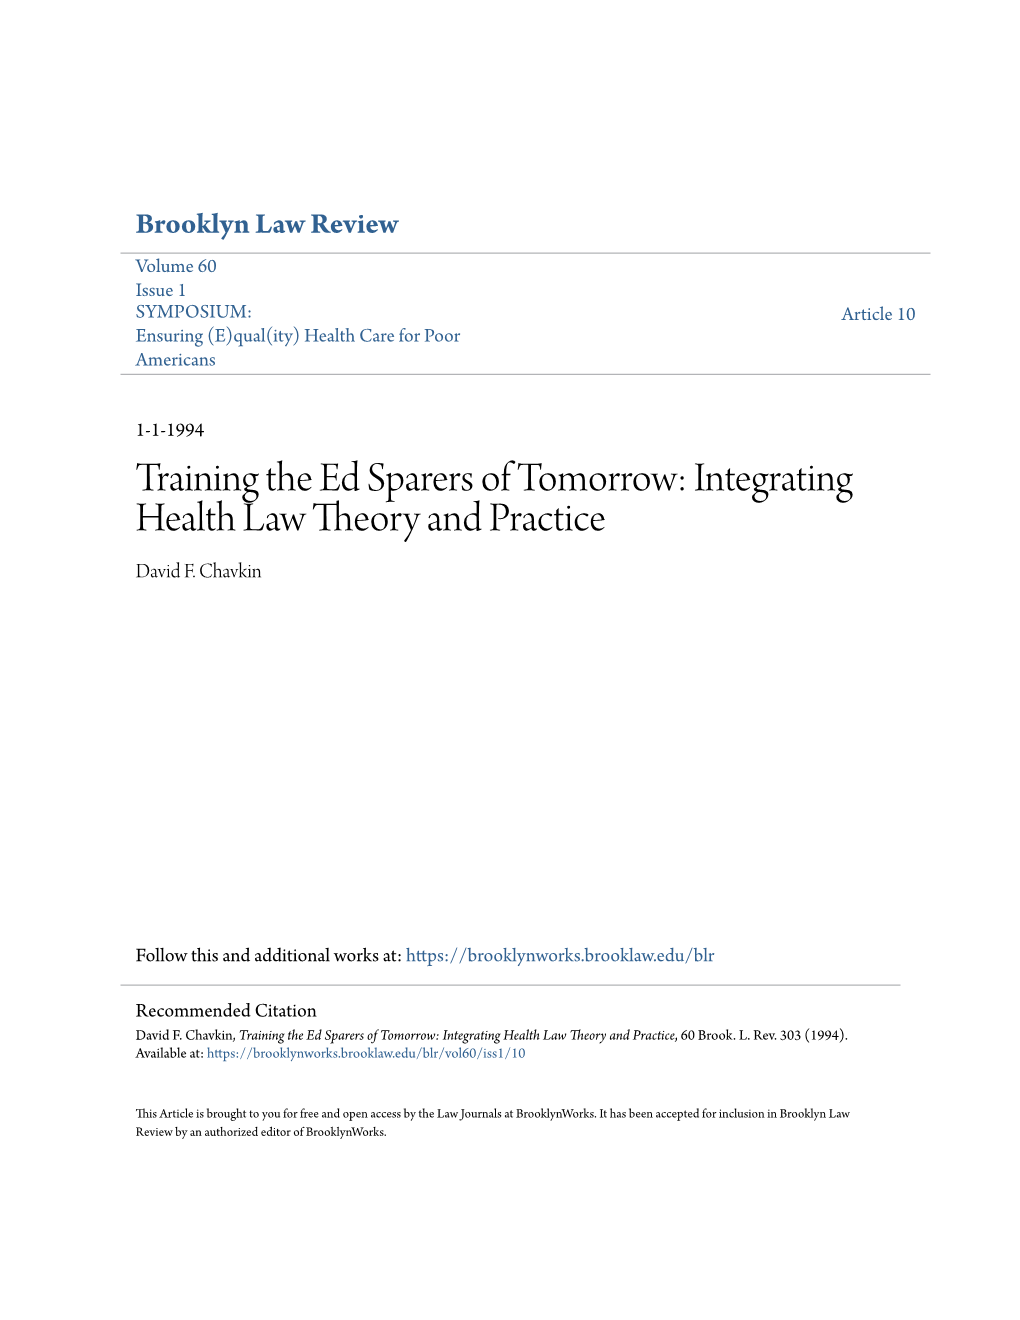 Training the Ed Sparers of Tomorrow: Integrating Health Law Theory and Practice David F